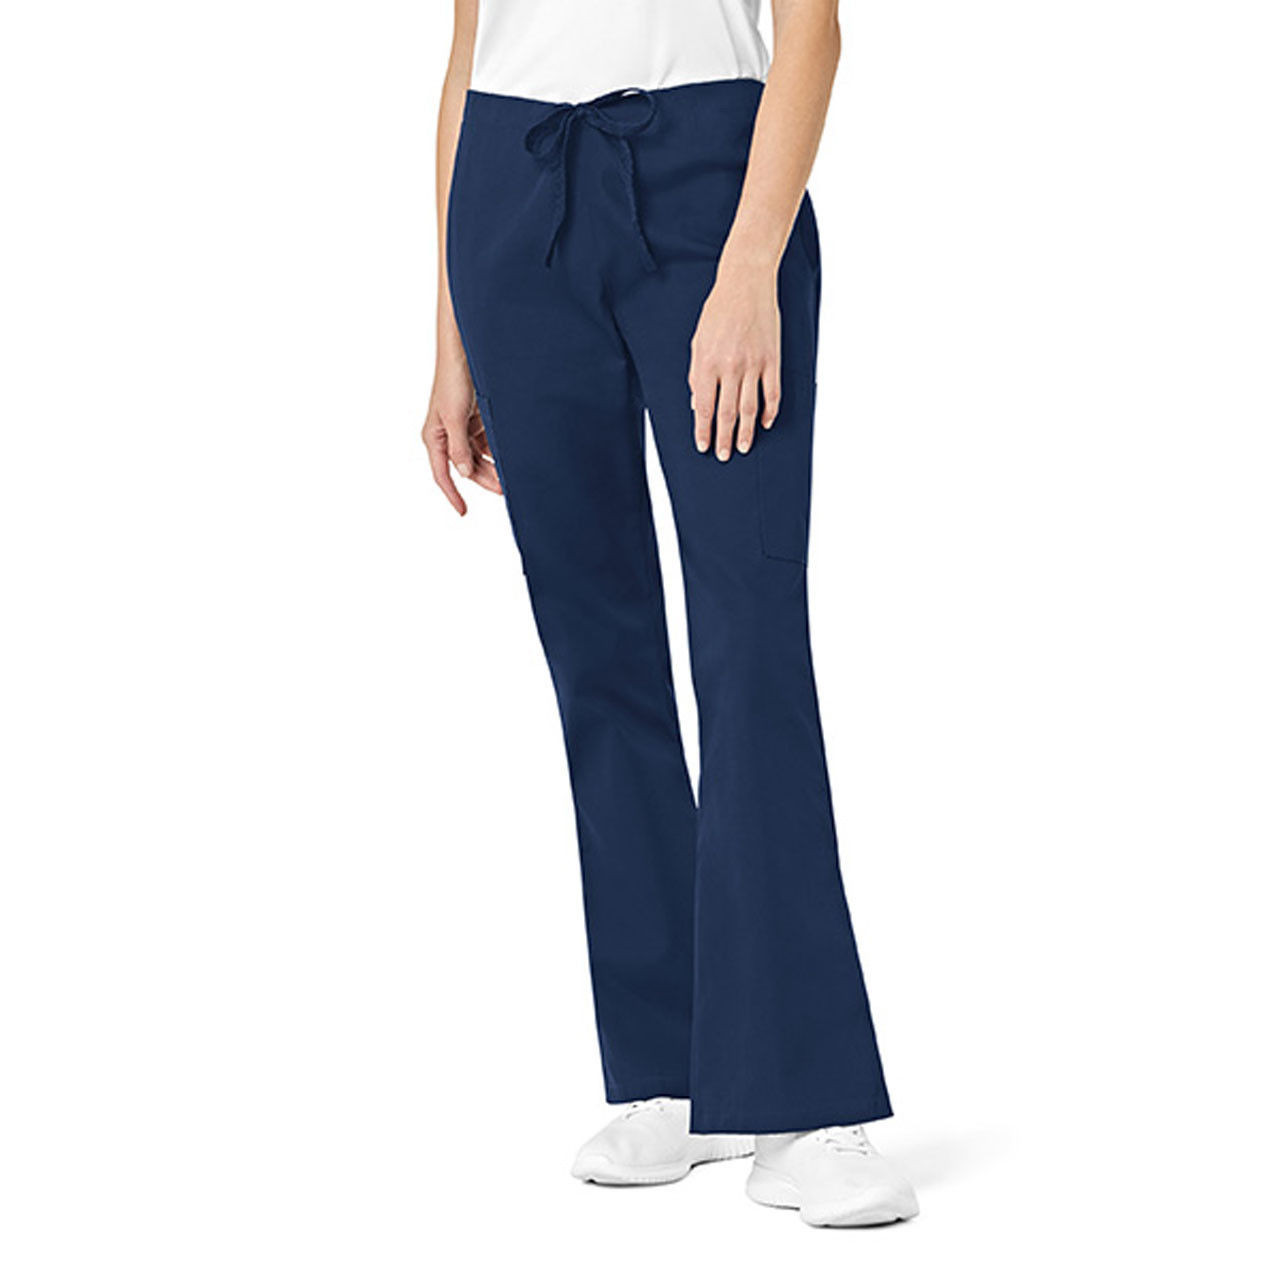 https://cdn11.bigcommerce.com/s-zd141b7qtp/images/stencil/1280x1280/products/47473/157834/womens-flare-cargo-pants-navy-fashion-seal-healthcare__73853.1708426559.jpg?c=1